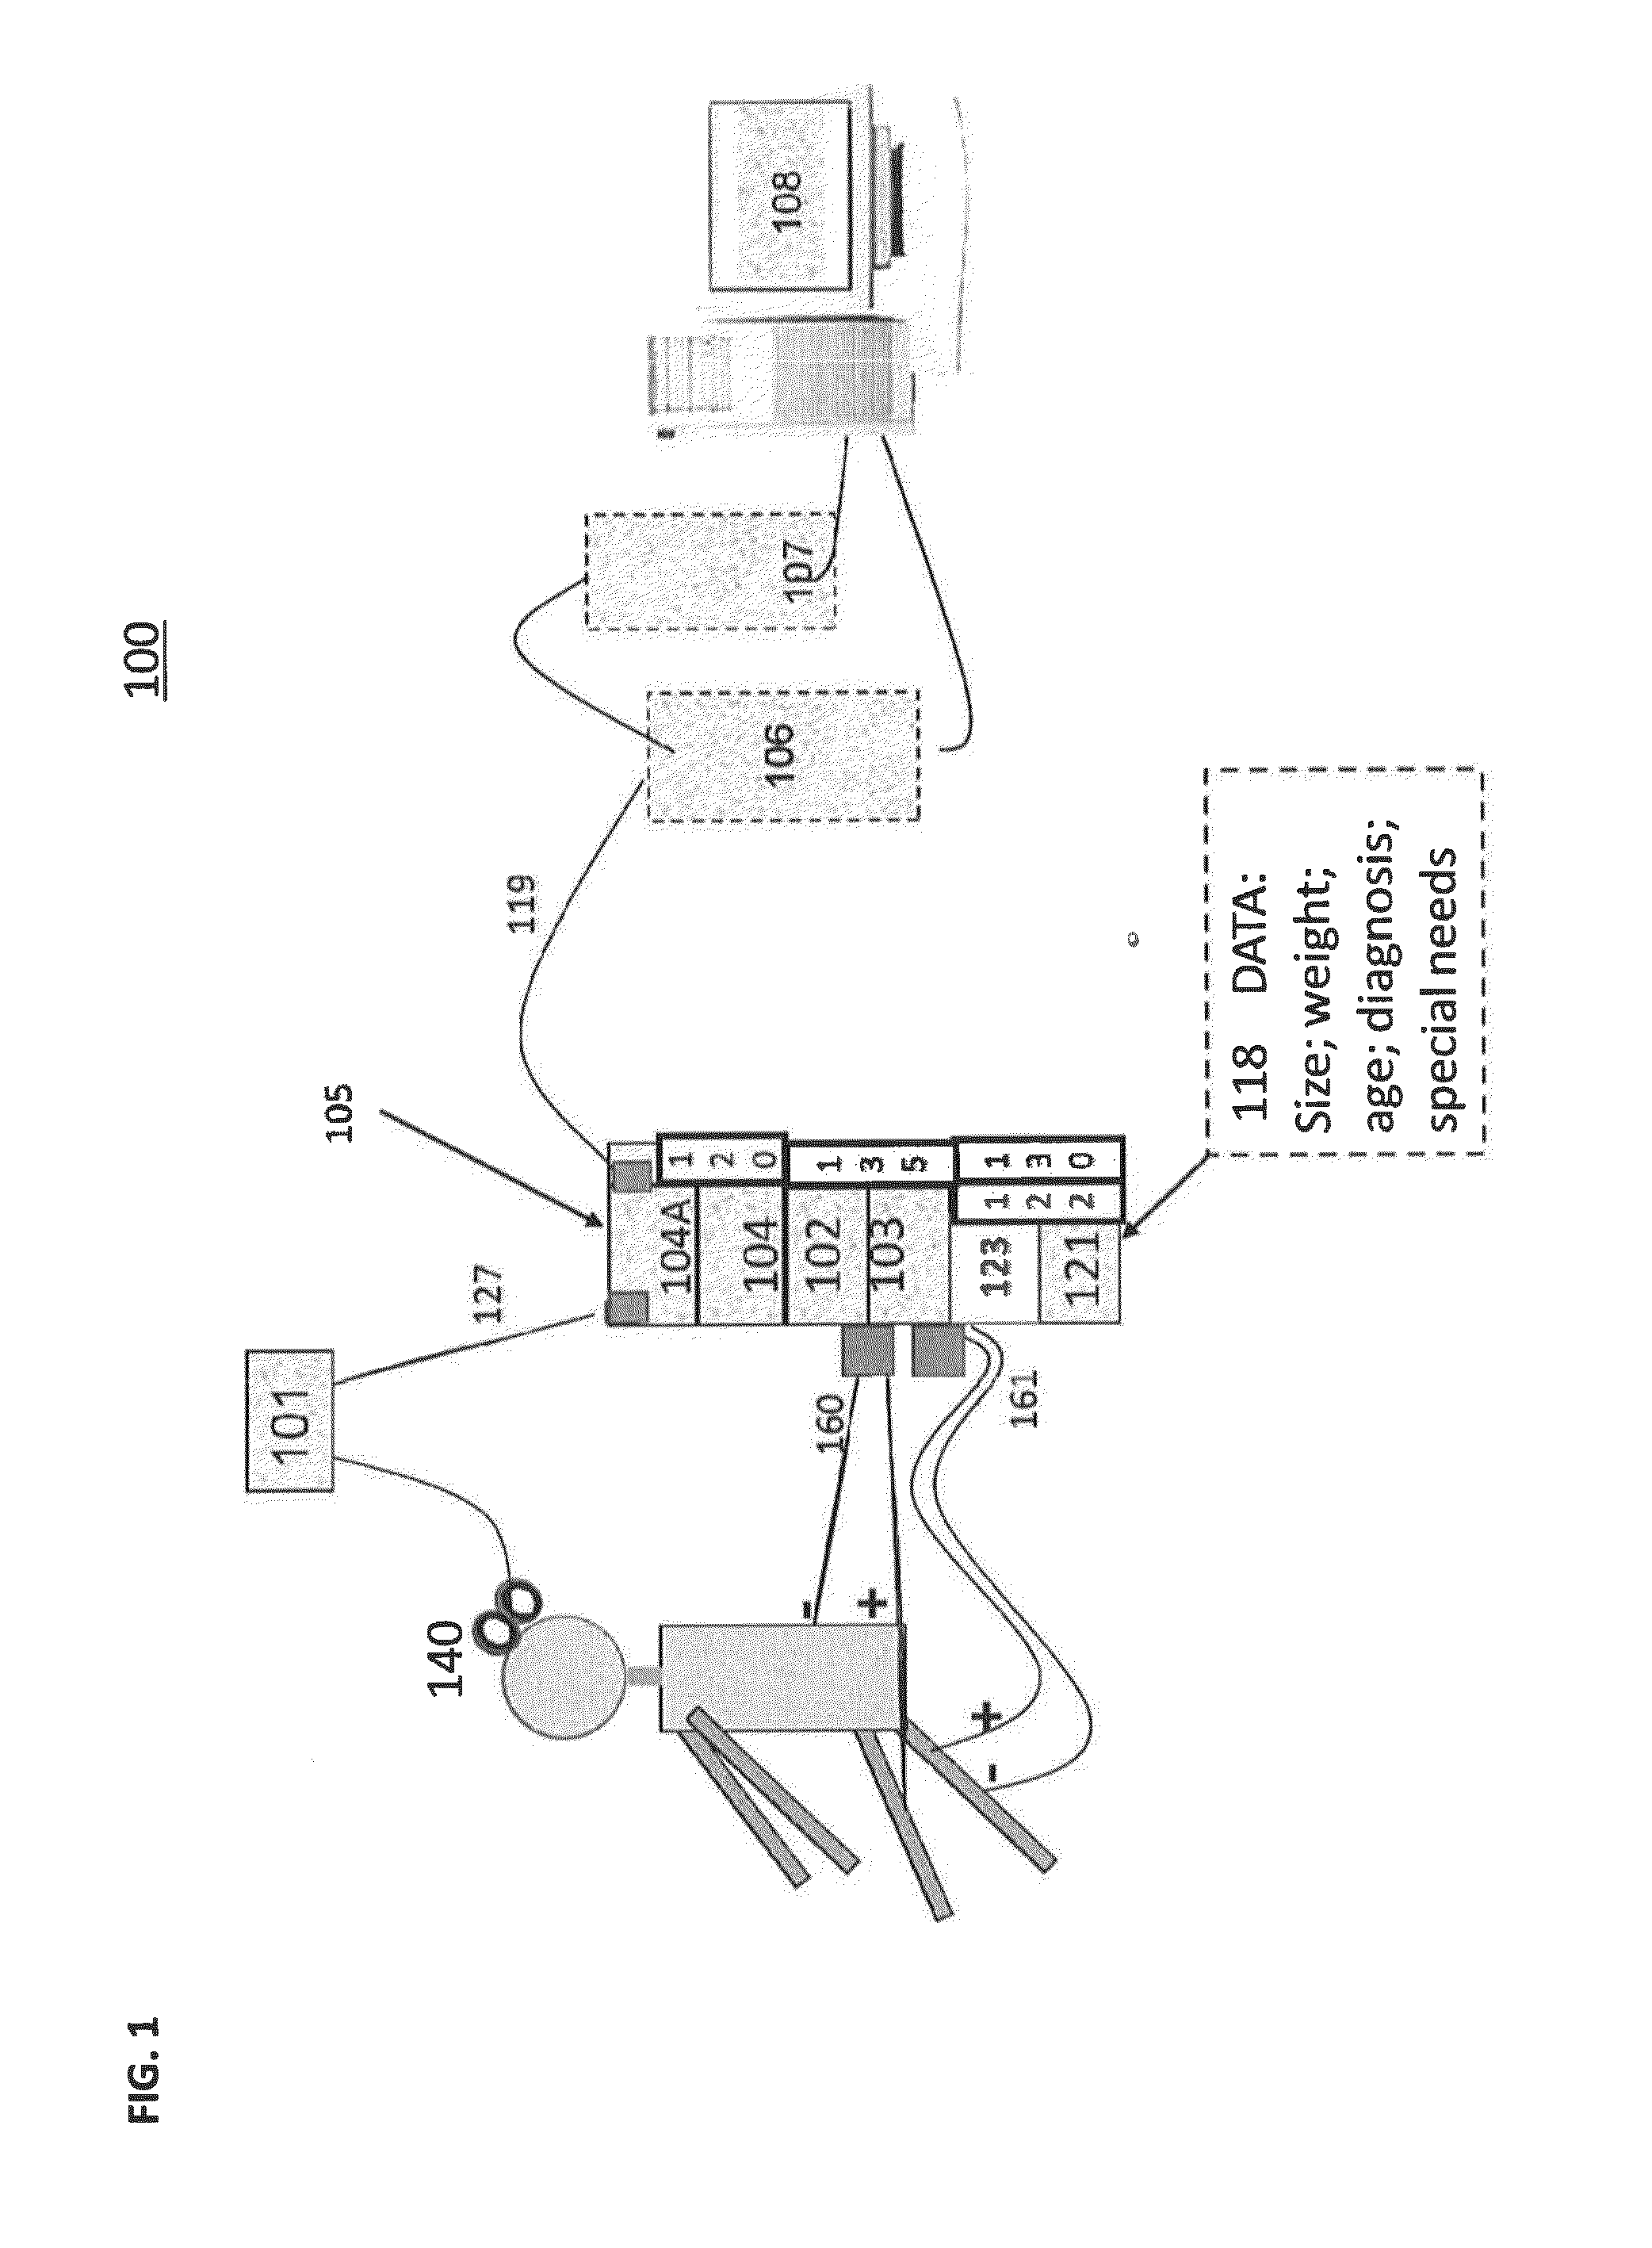 Method and system for treatment of neuromotor dysfunction